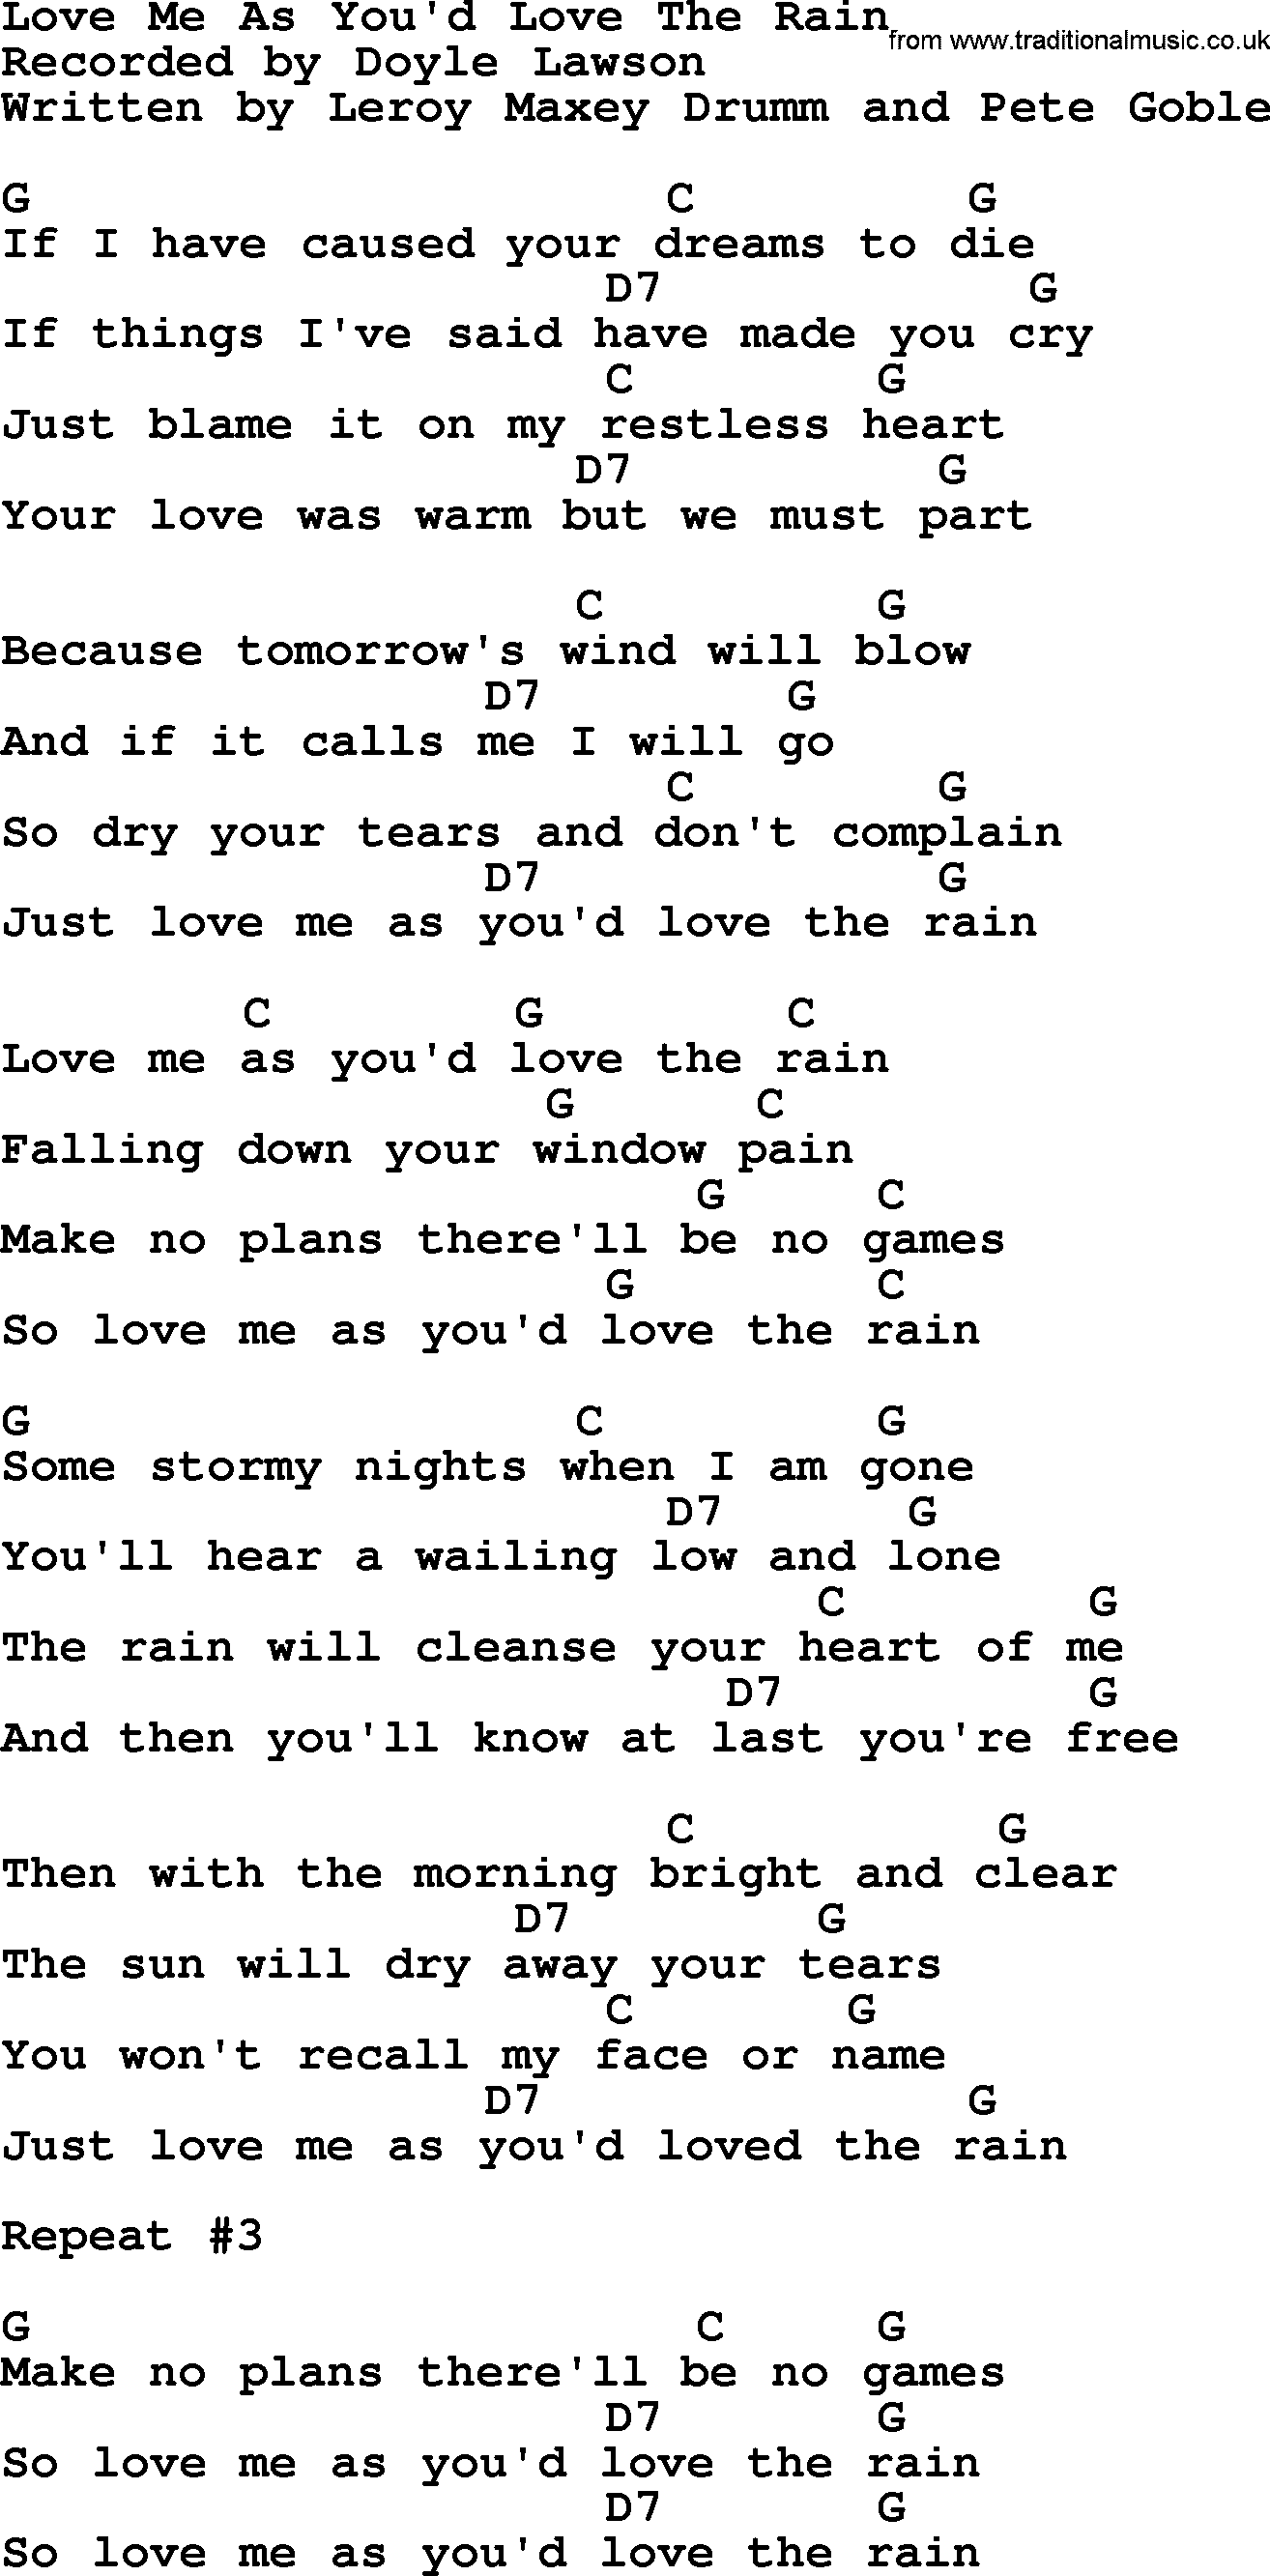 Bluegrass song: Love Me As You'd Love The Rain, lyrics and chords